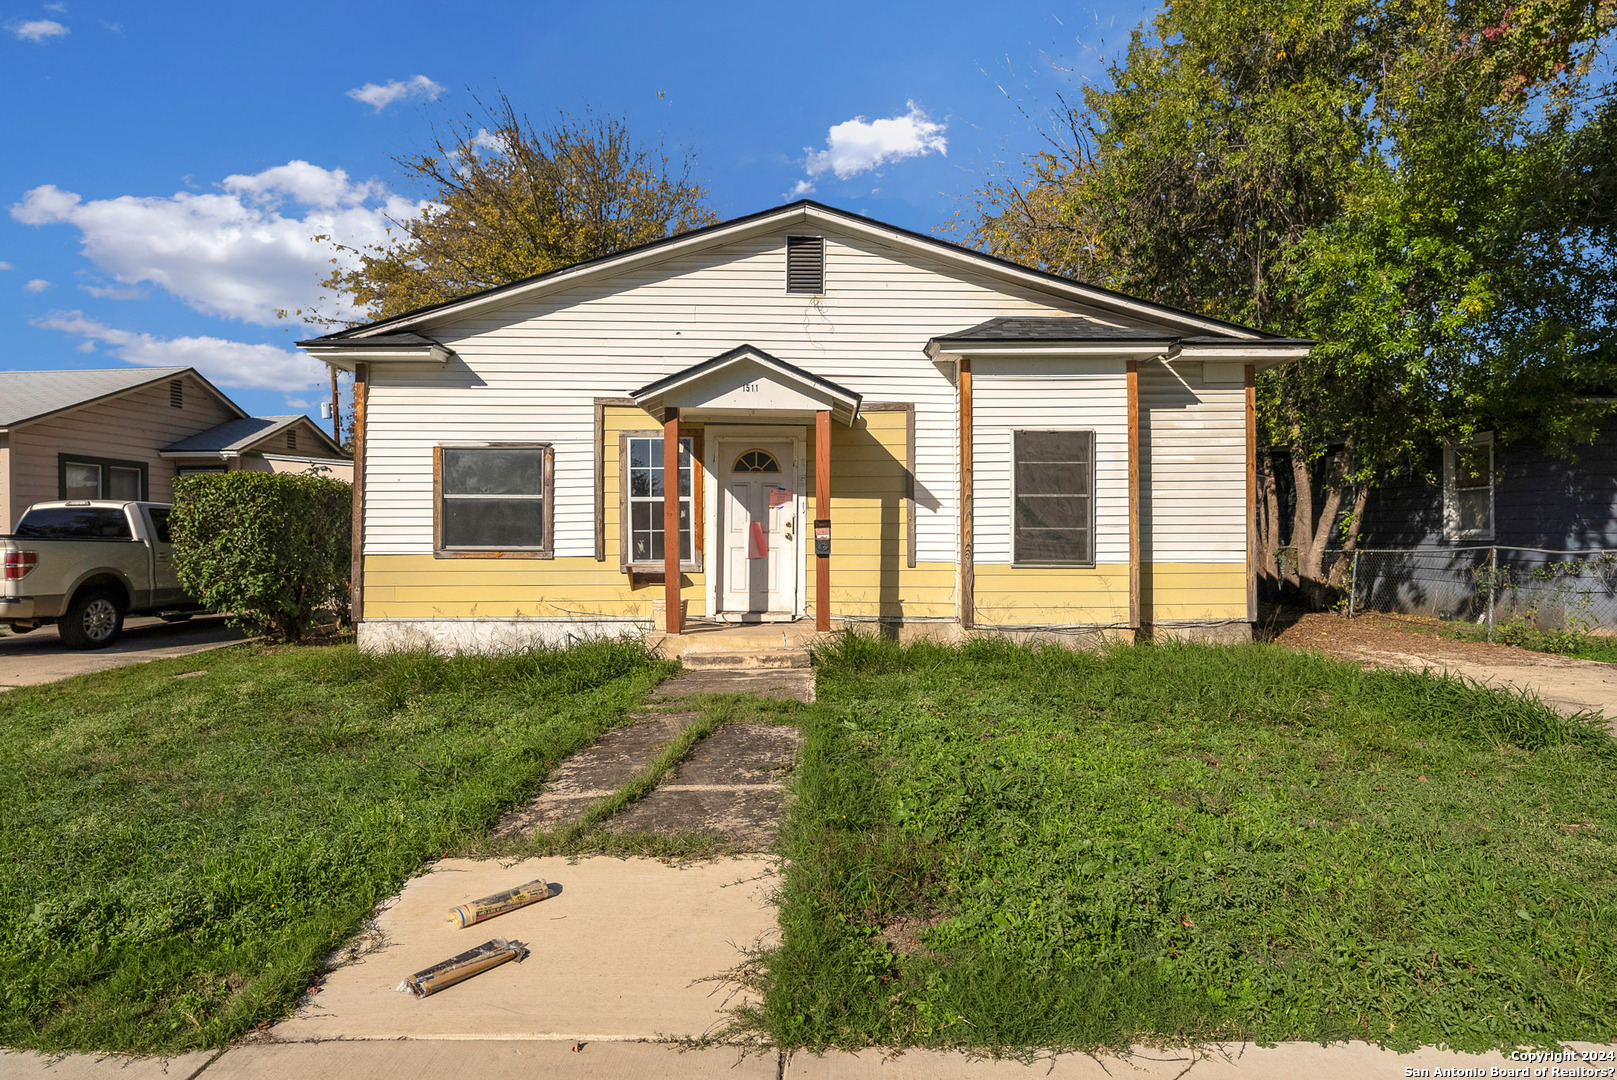 Photo of 1511 Hollywood Ave in San Antonio, TX